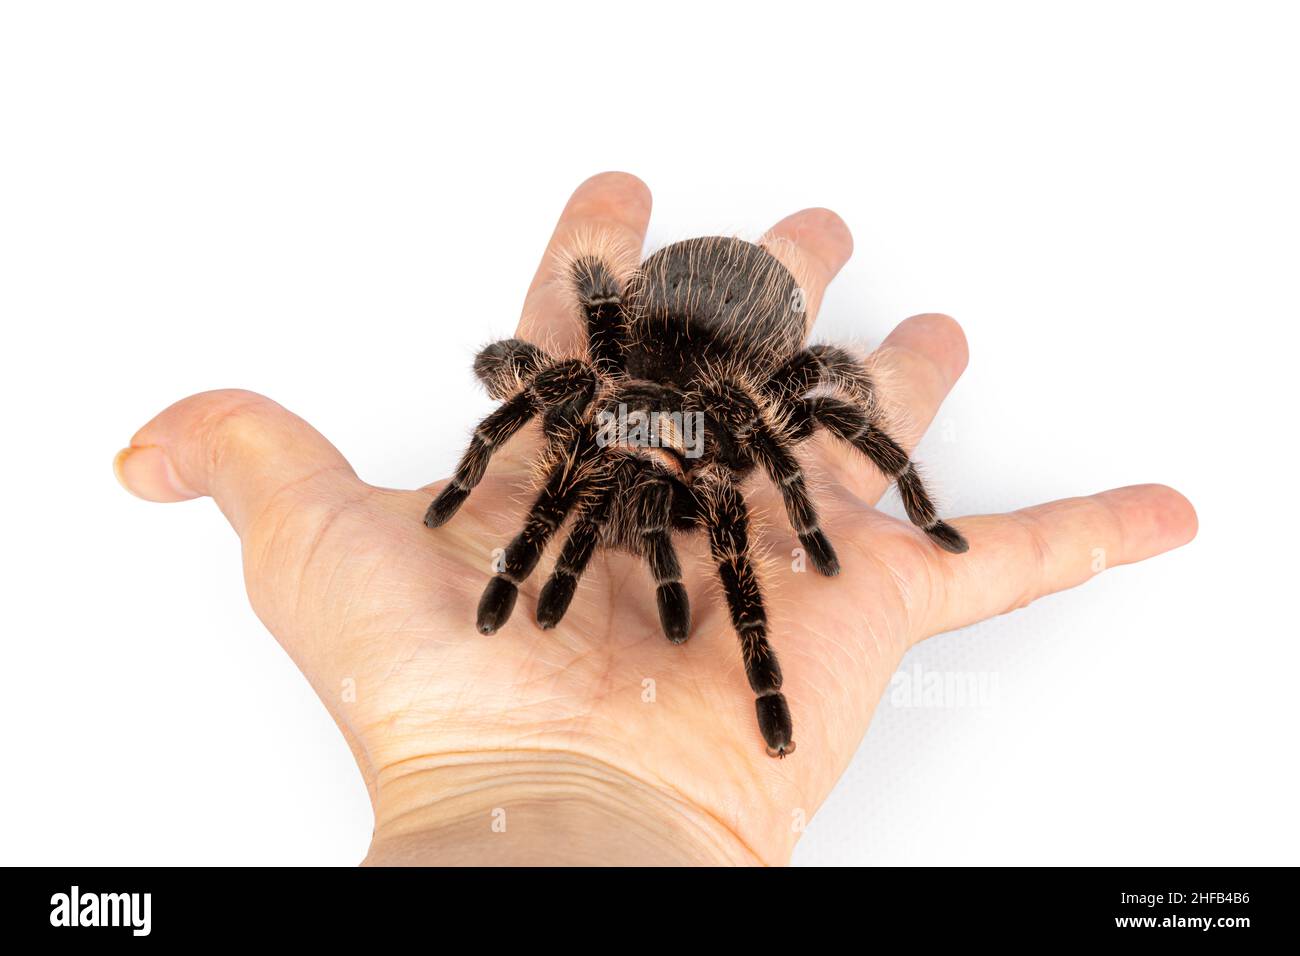 Top view of female adult Curly Hair Tarantula aka Tliltocatl albopilosus, standing on human hand. Isolated on a white background. Stock Photo